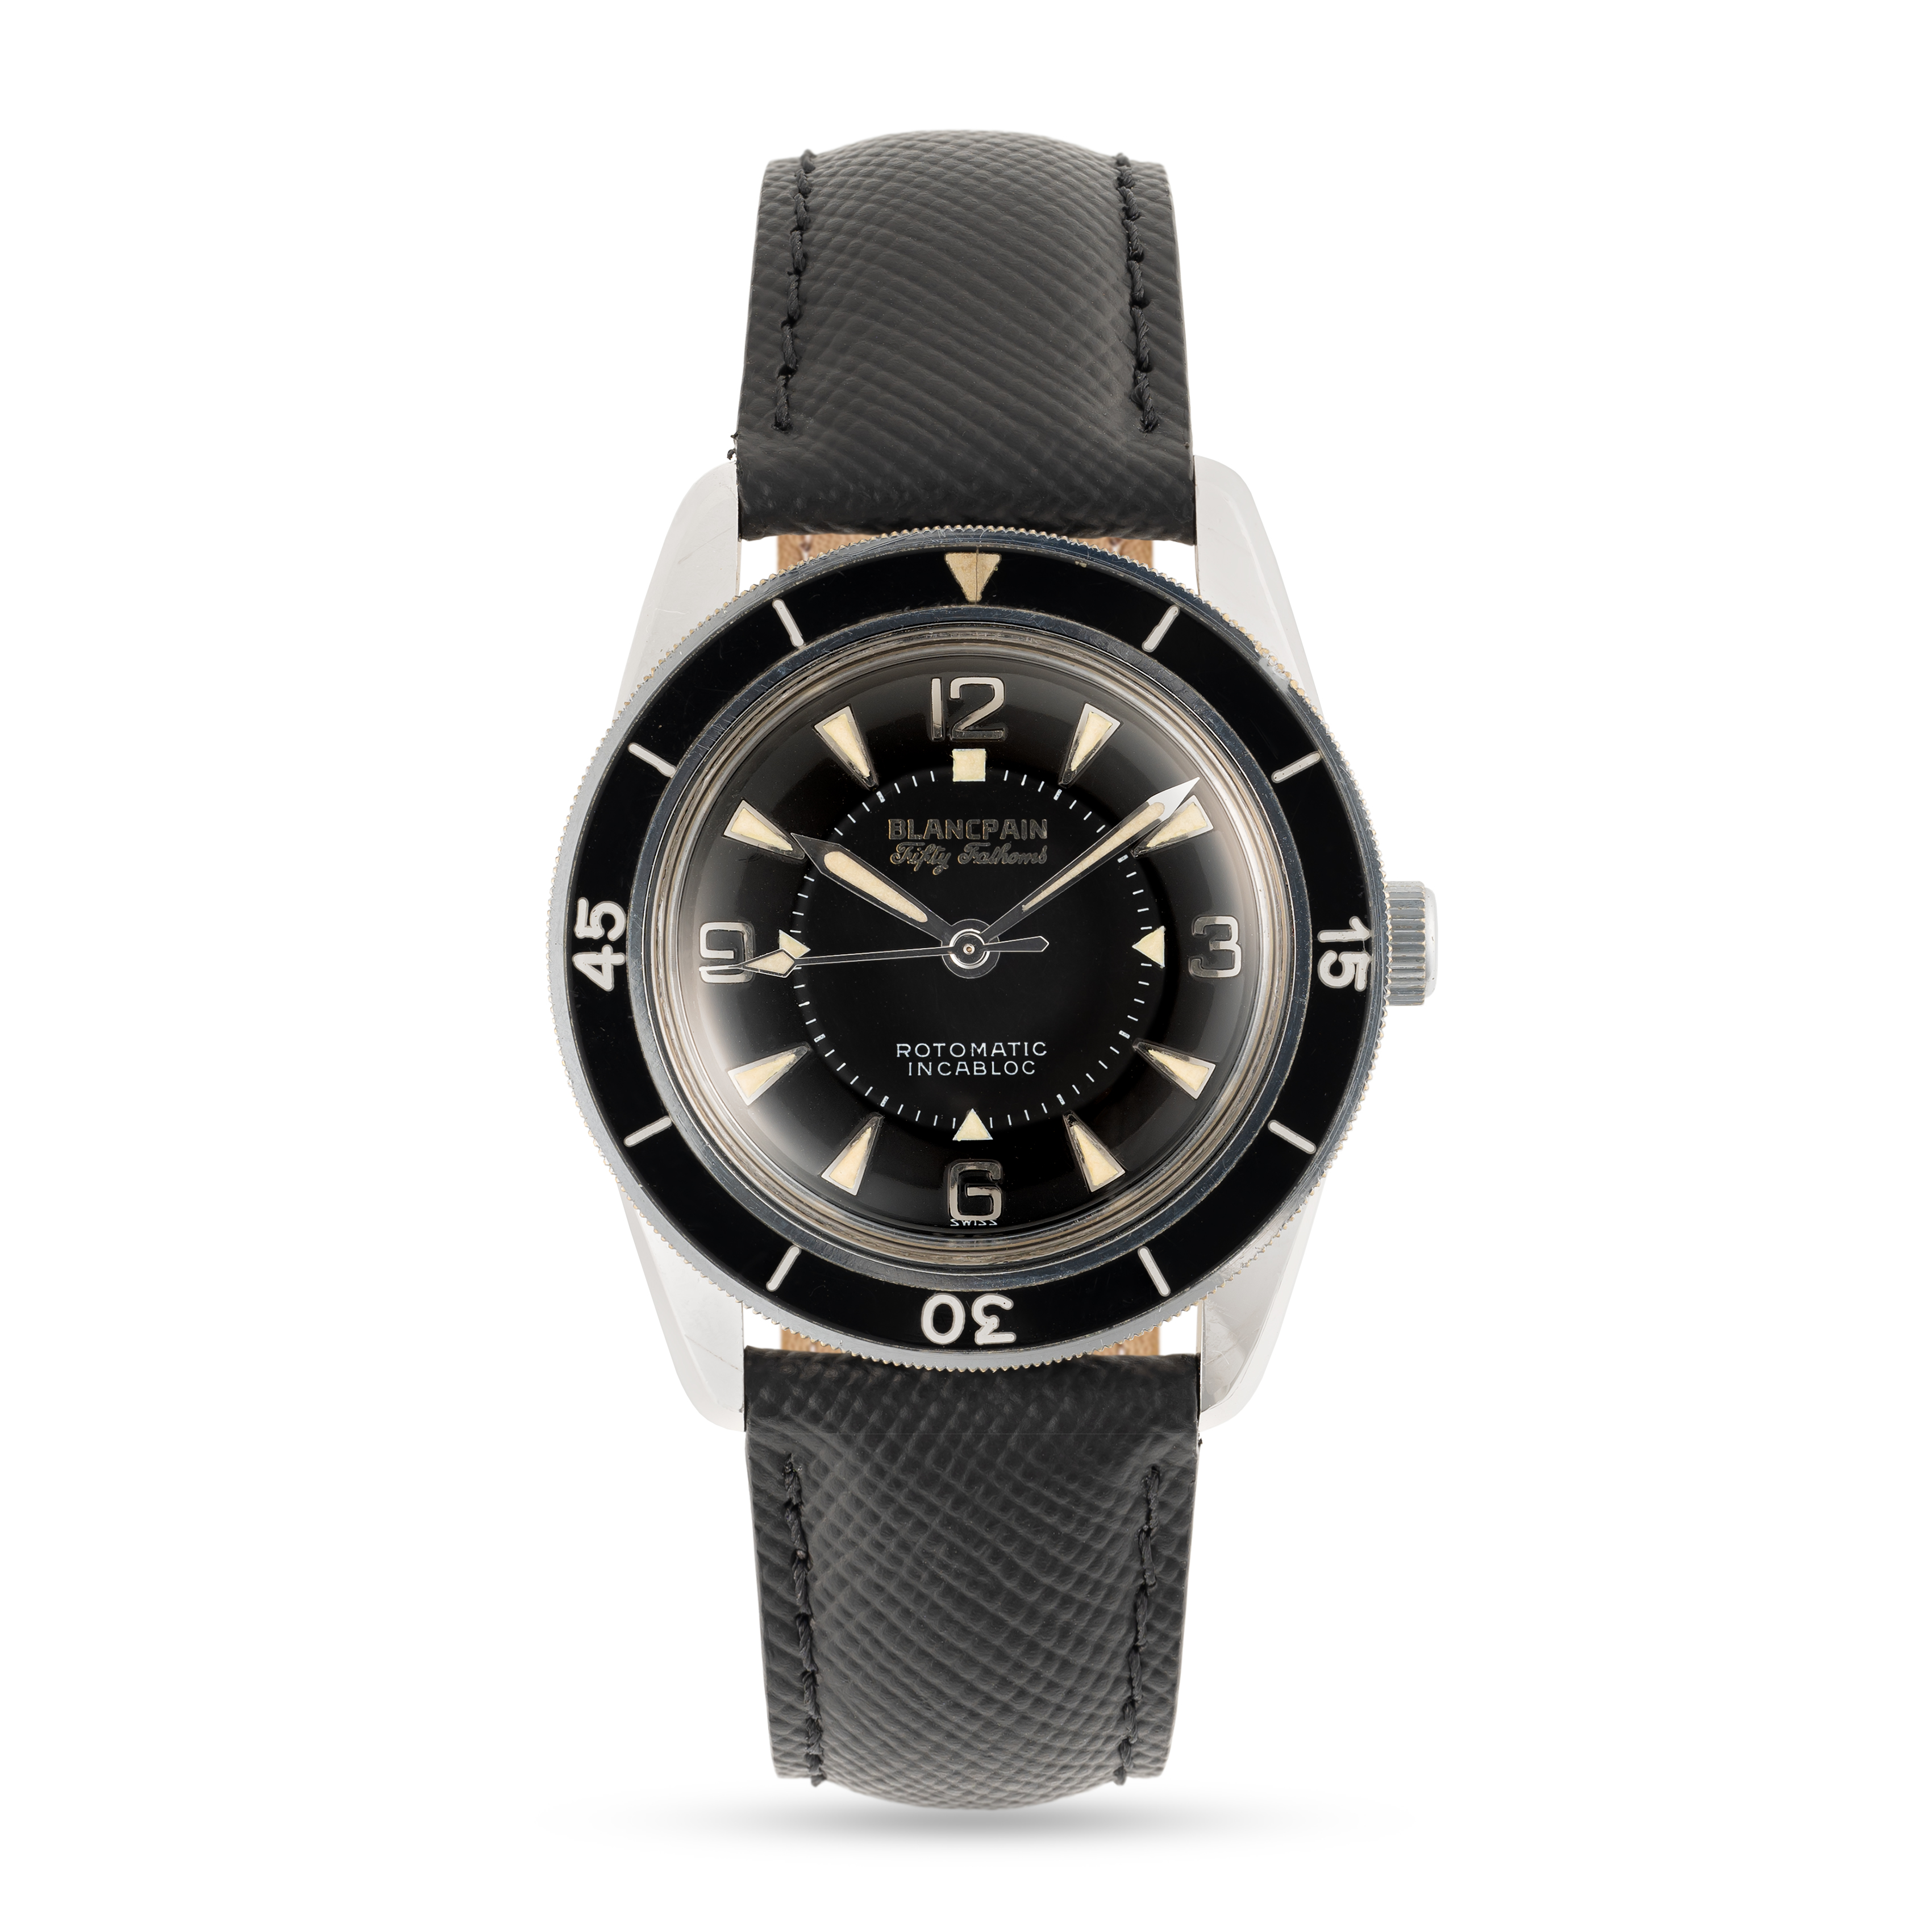 A RARE GENTLEMAN'S SIZE BLANCPAIN FIFTY FATHOMS ROTOMATIC DIVERS WRIST WATCH CIRCA 1950s, THIS WATCH - Image 2 of 8